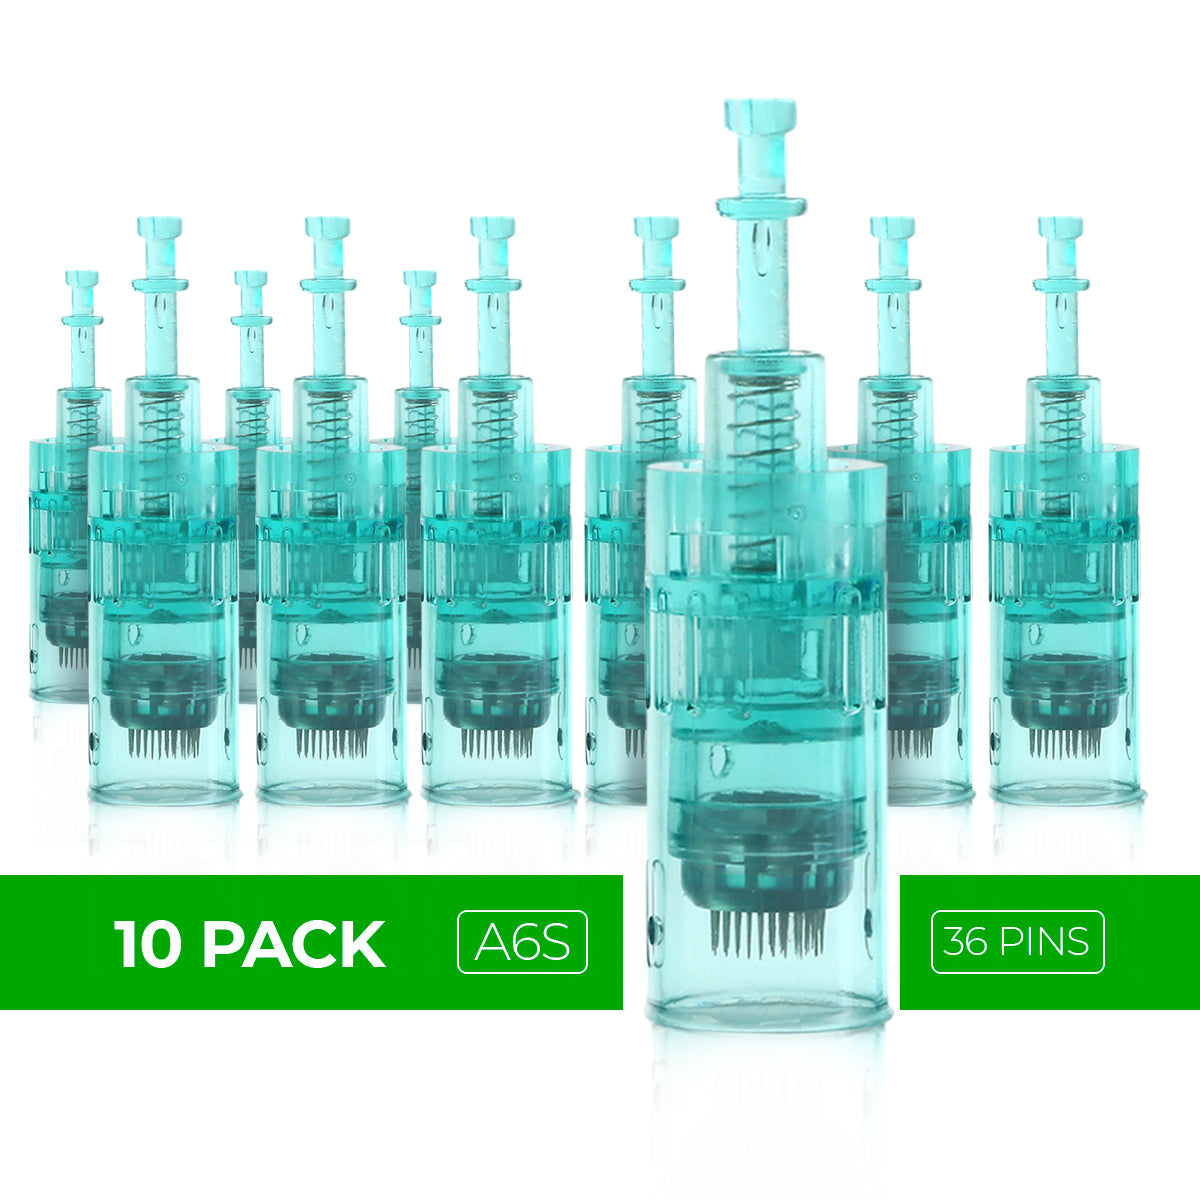 Dr. Pen Ultima A6S Replacement Cartridges - (10 Pack) - 36 Pins Bayonet Slot - Disposable Replacement Parts